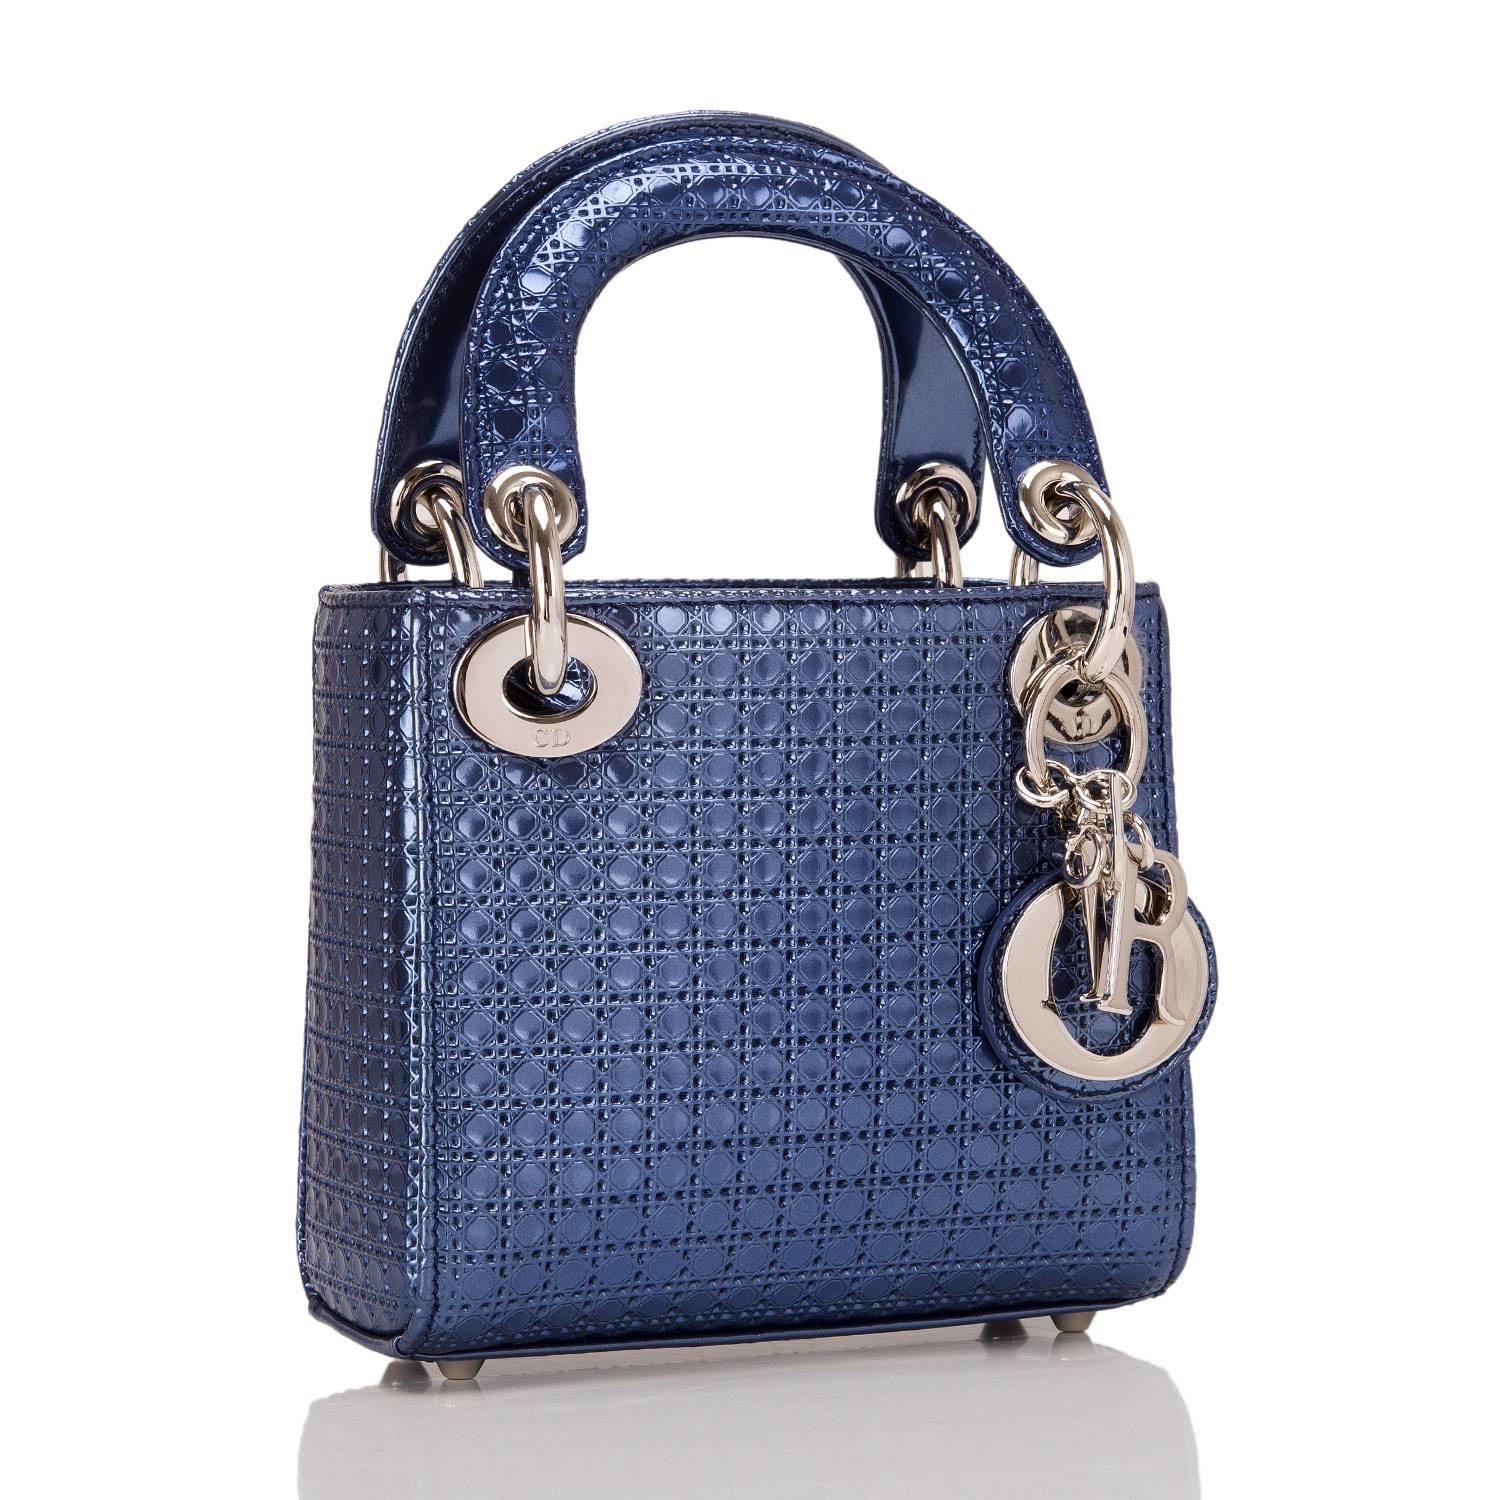 Dior Lady Dior Micro bag of blue metallic perforated calfskin and silver-tone hardware.

This Micro has a micro-cannage pattern all over, gusseted sides, four protective feet at bottom, top flap closure, double rounded flat handles, removable